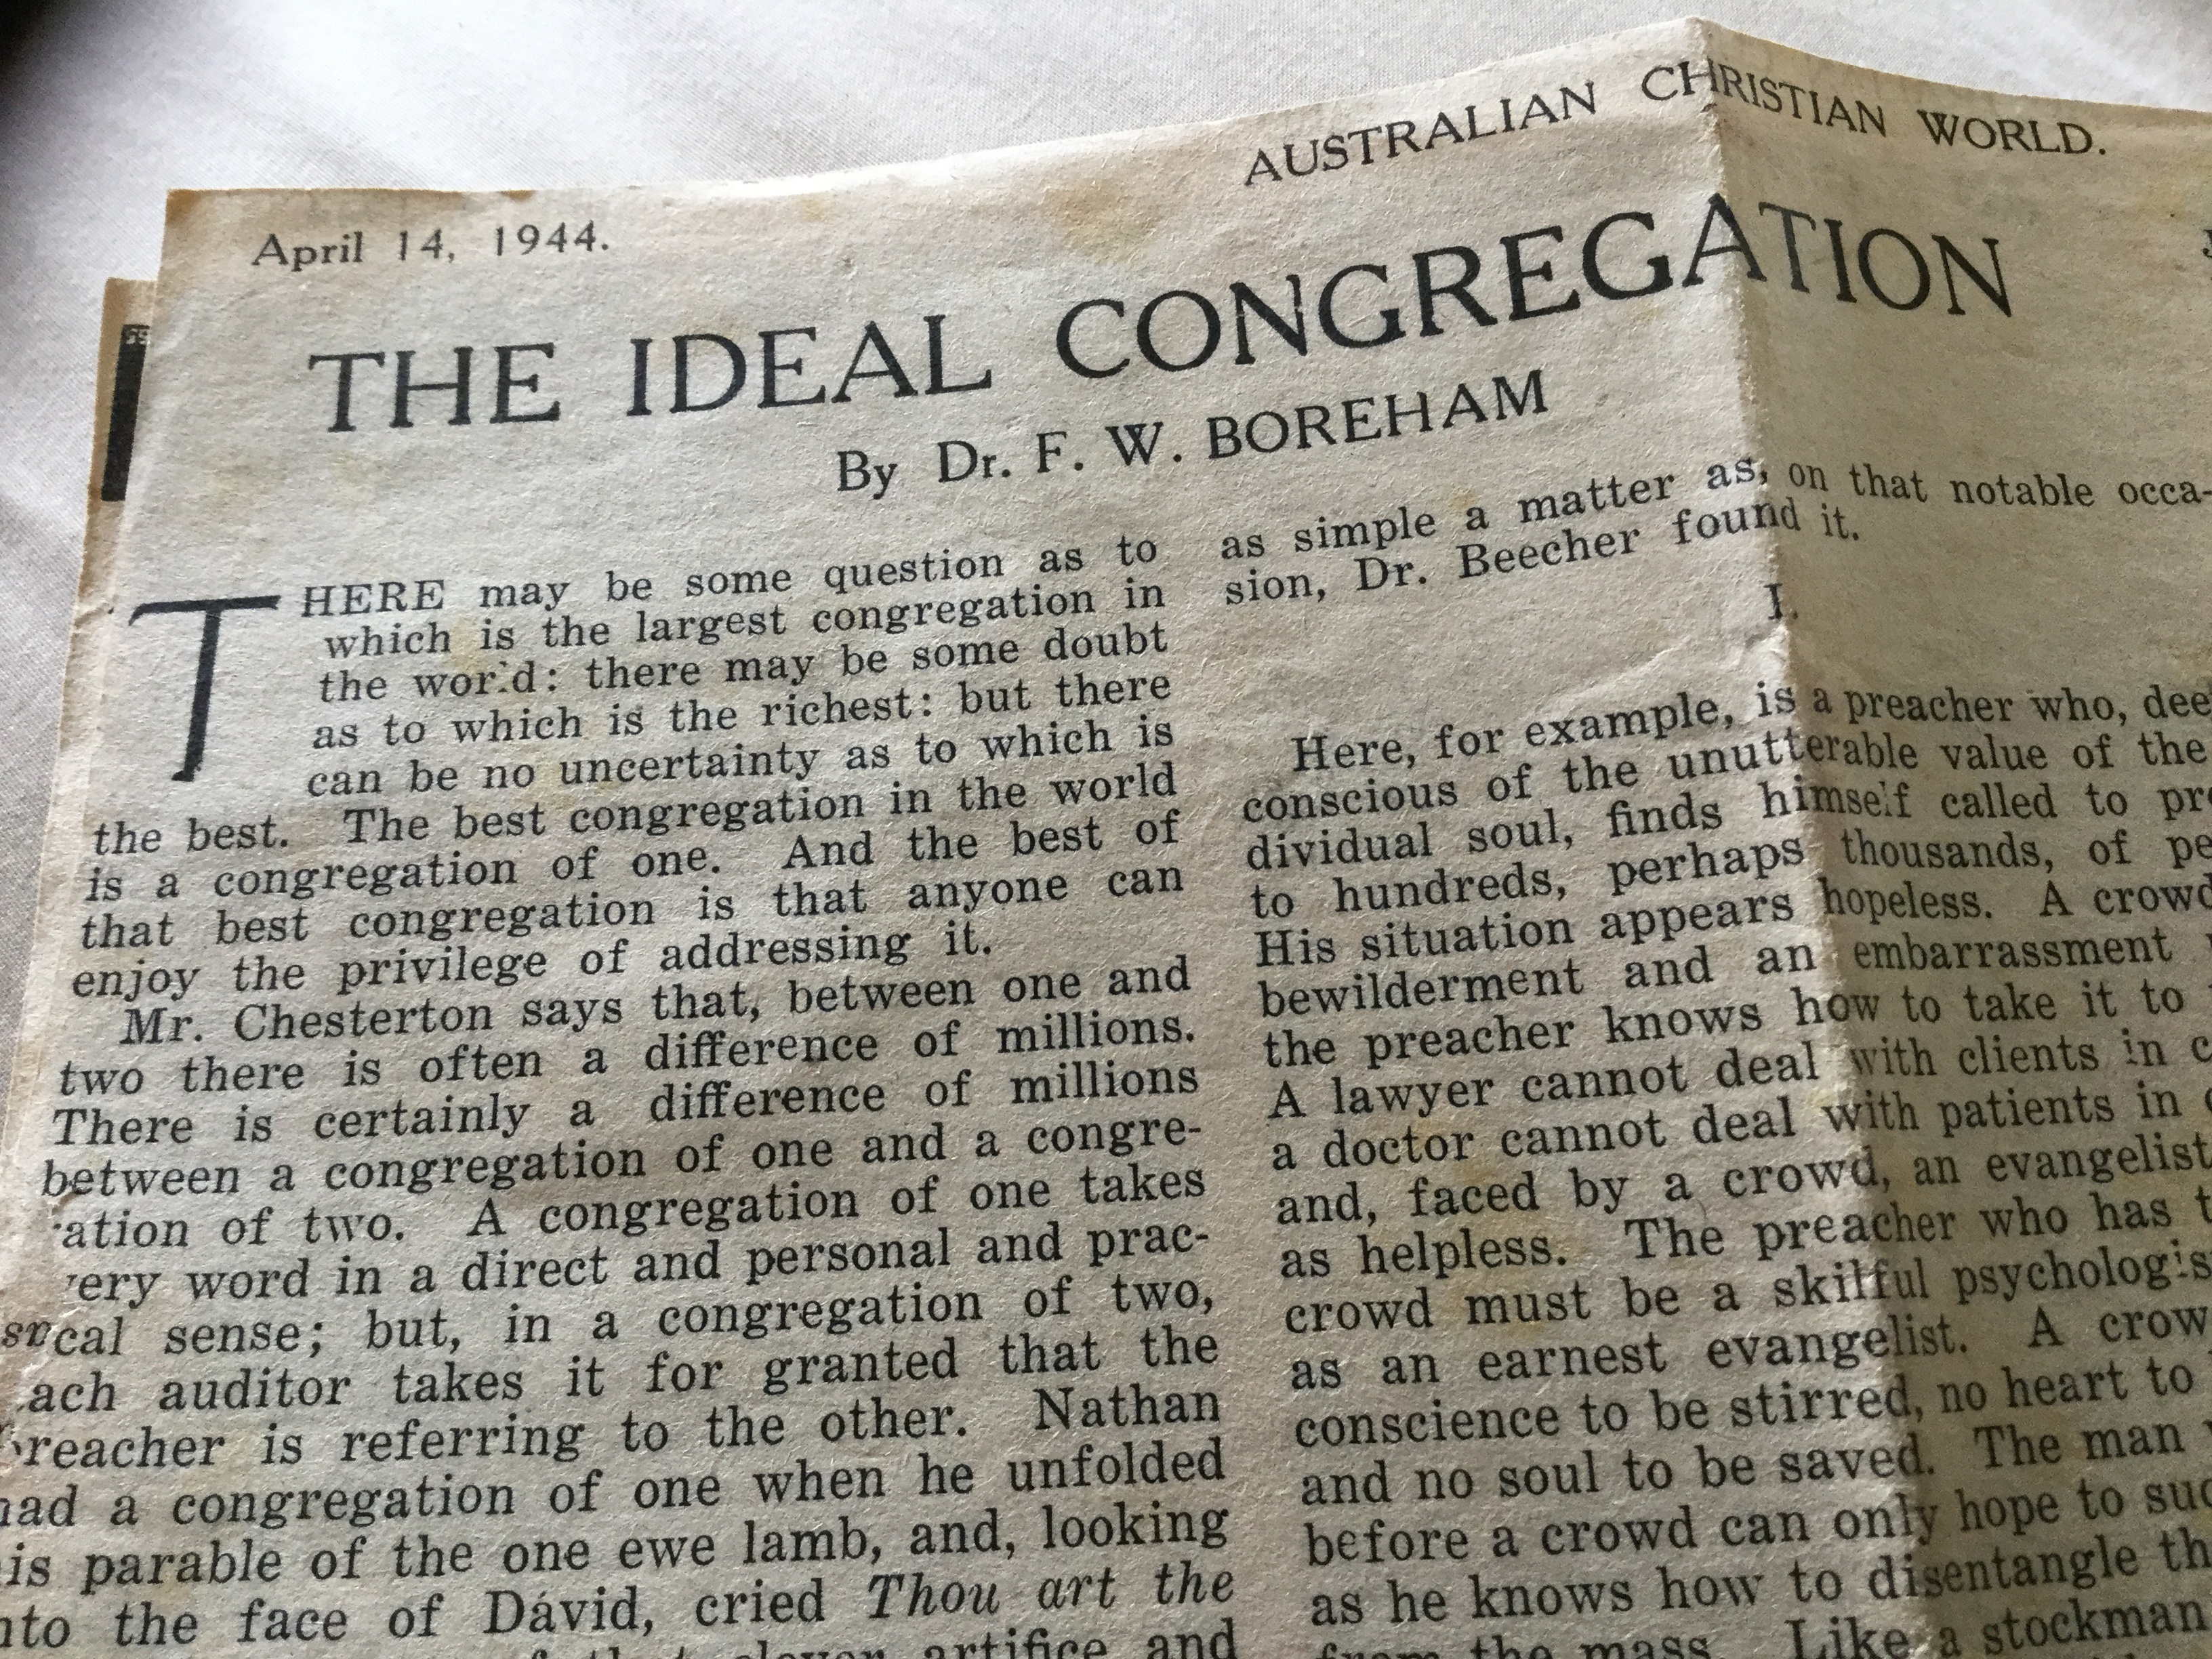 The Ideal Congregation, originally appeared in the Australian Christian World in 1944 and was later published in the 1954 book- Dreams At Sunset. Click here to read the essay.